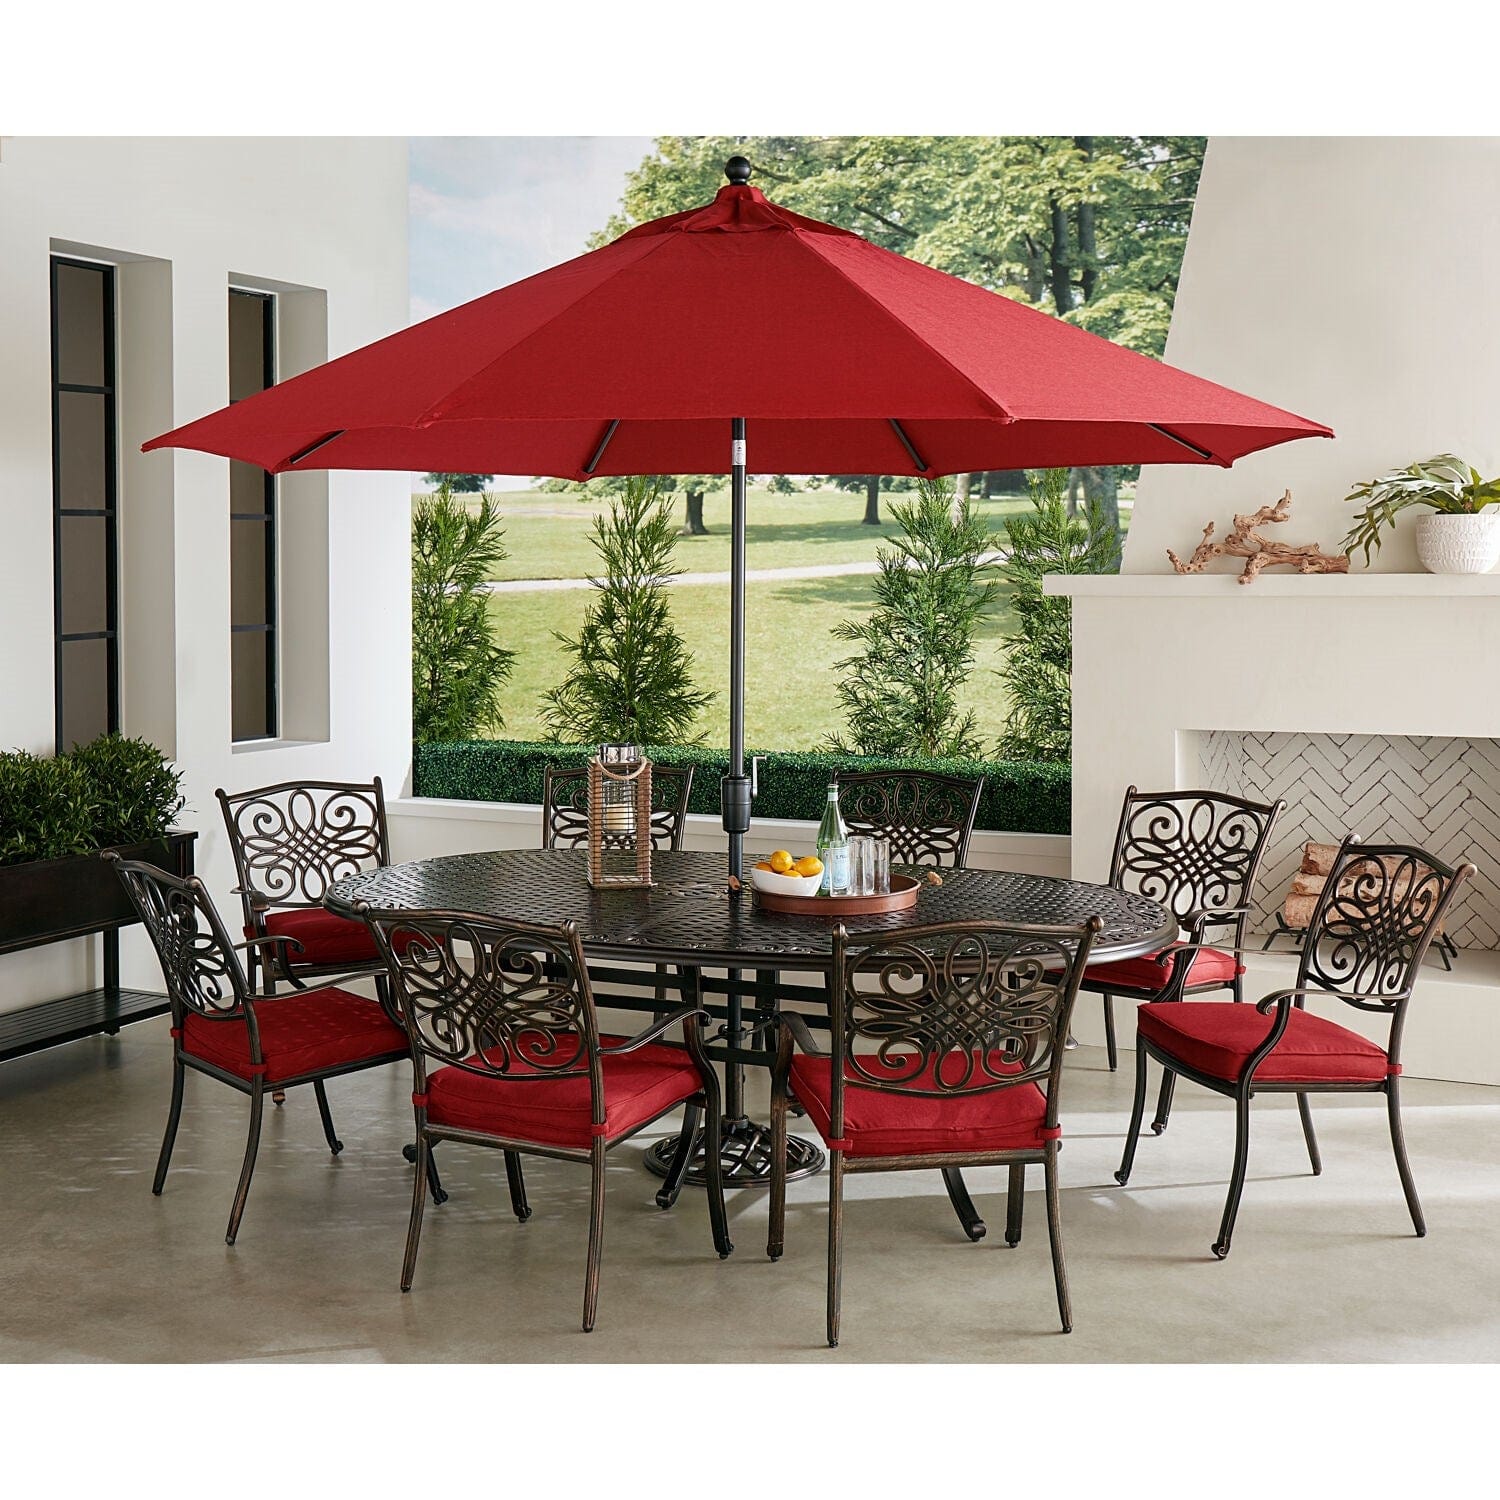 Hanover Outdoor Dining Set Hanover Traditions 9-Piece Dining Set in Red with 8 Dining Chairs, 95-in. x 60-in. Oval Cast-Top Table, Umbrella and Stand | TRADDN9PCOV-SU-R